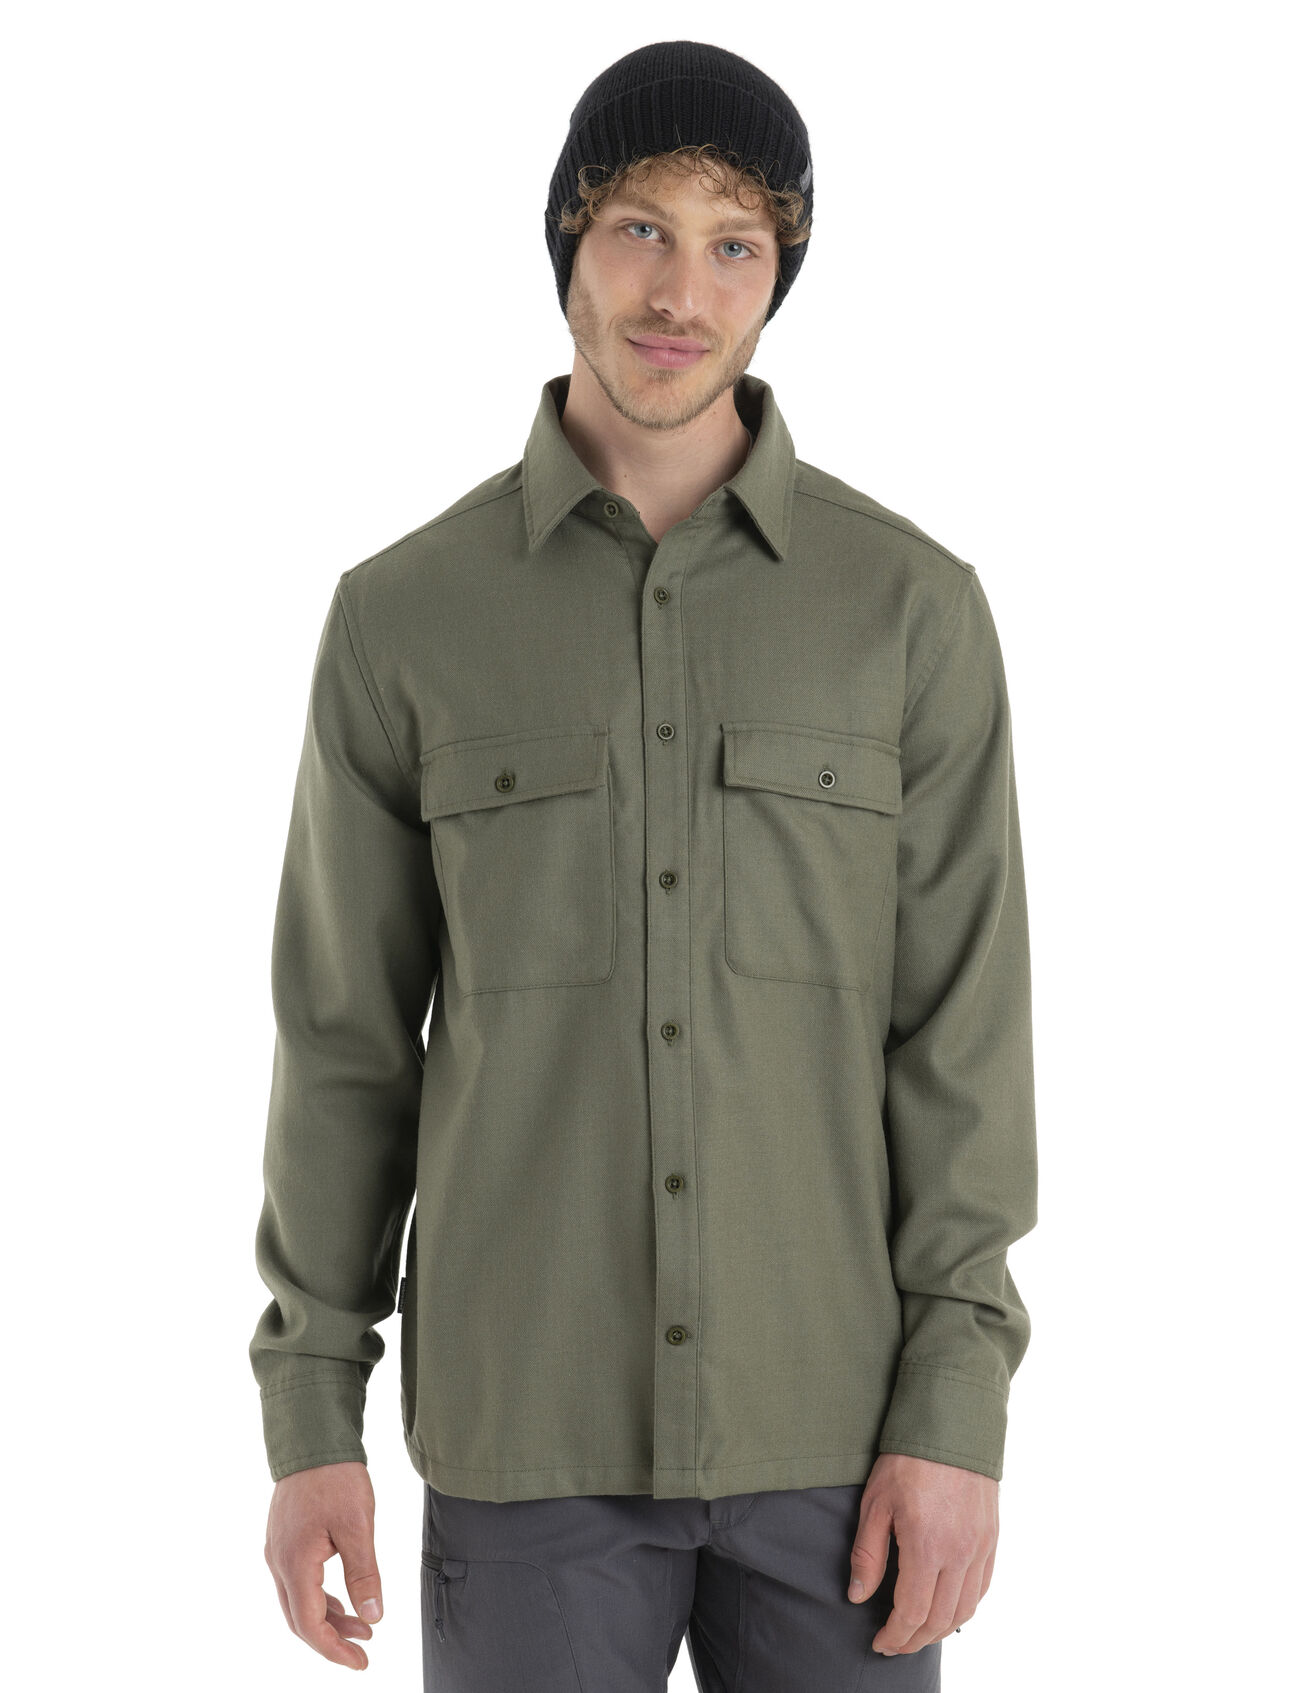 Mens Merino 200 Dawnder Long Sleeve Flannel Shirt A soft and warm winter flannel made with classic style and 100% Merino wool, the 200 Dawnder Long Sleeve Flannel Shirt is a cold-weather wardrobe essential. 